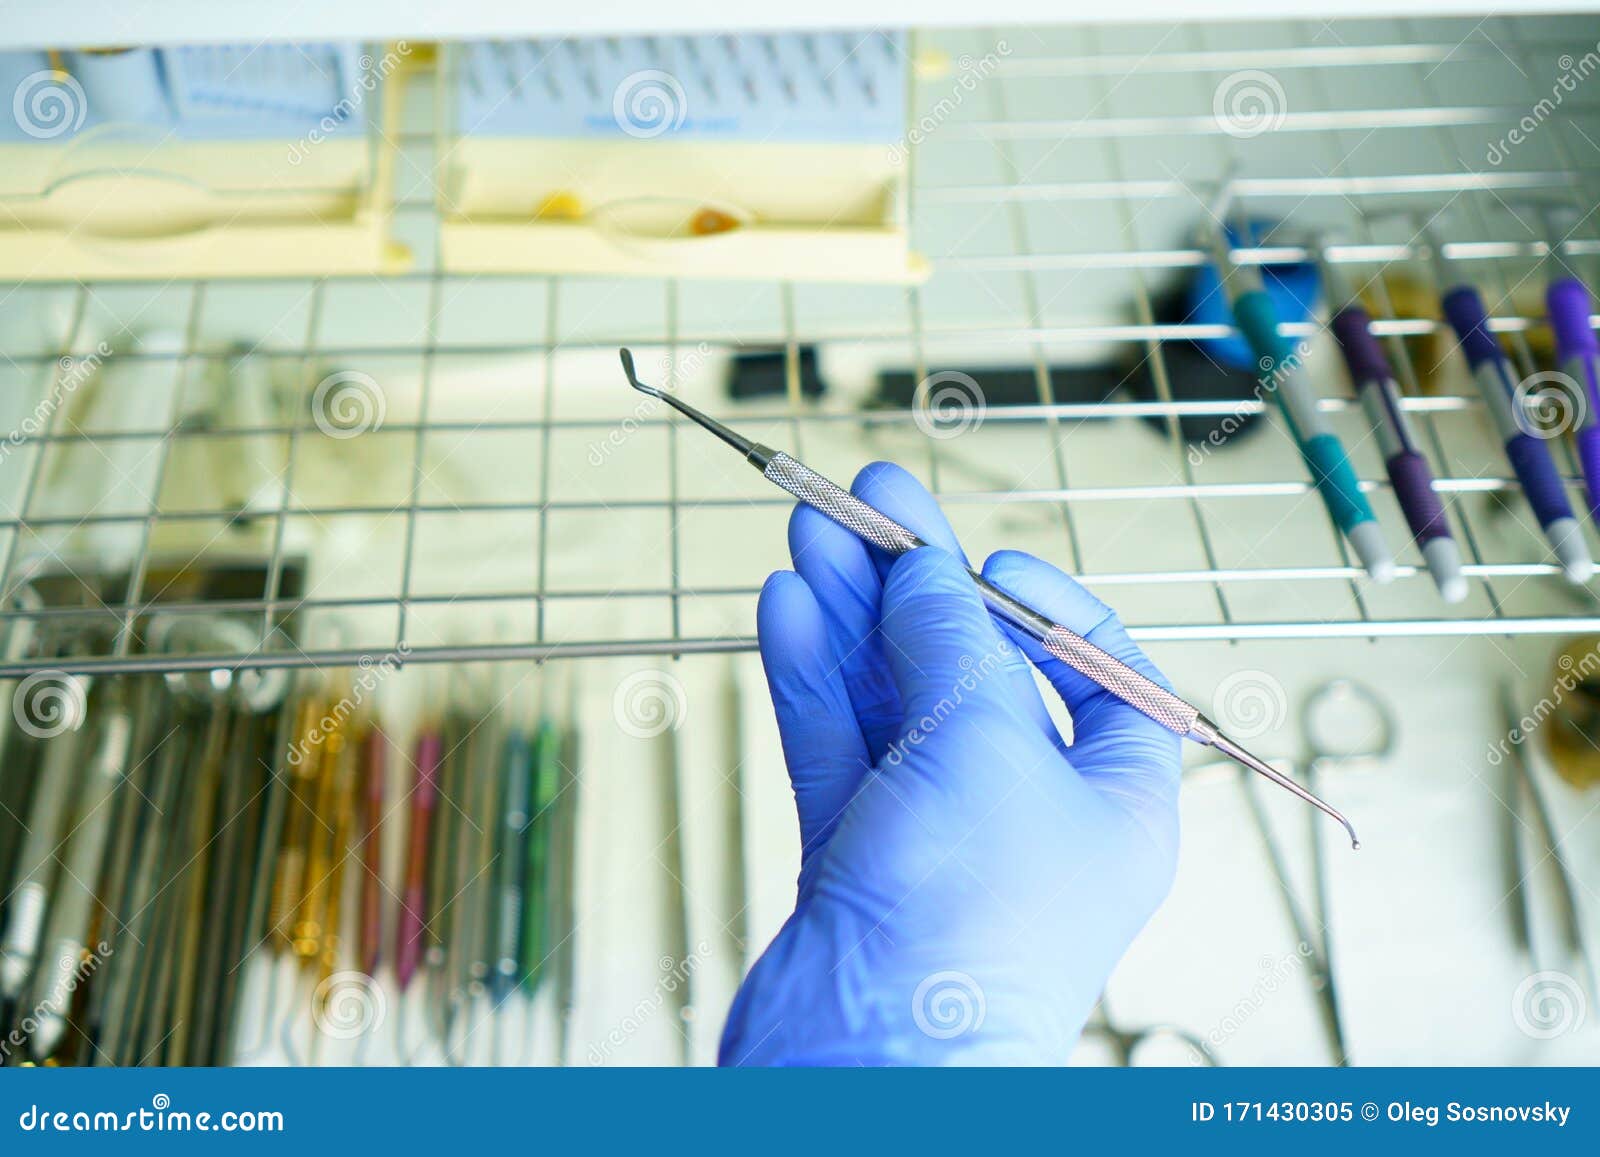 a medical worker puts a medical instrument in a device for disinfection and cleaning of germs. stylishness and cleanliness in